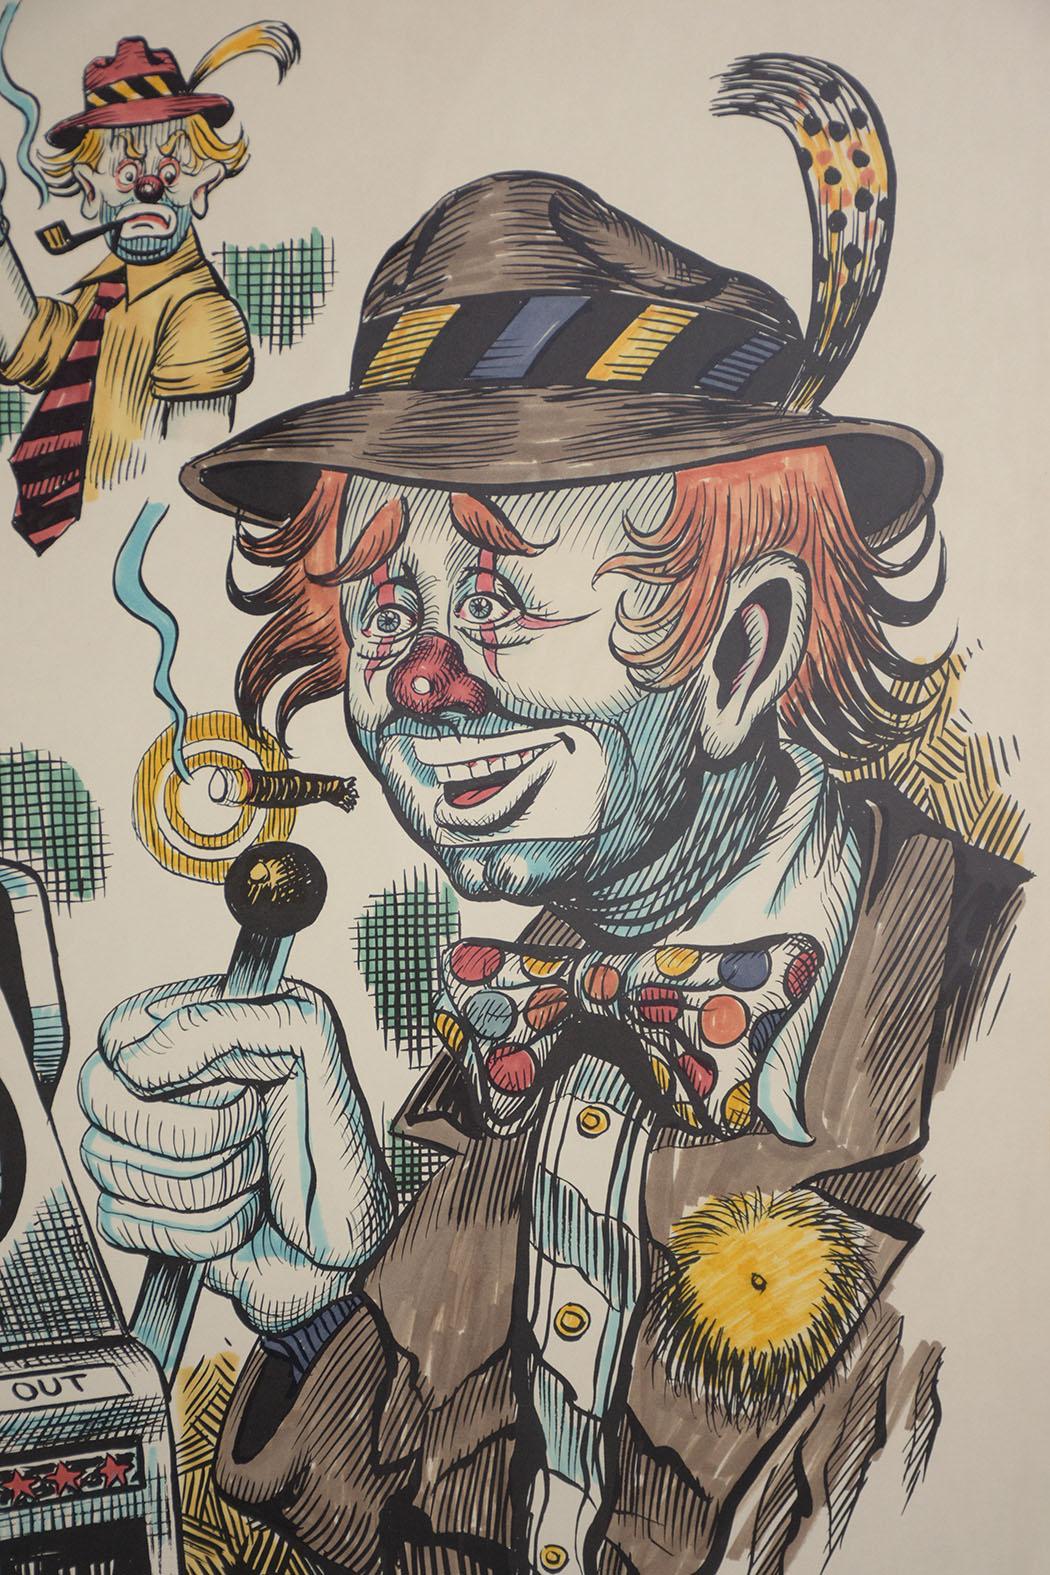 A Jackpot by George Crionas Color Lithograph